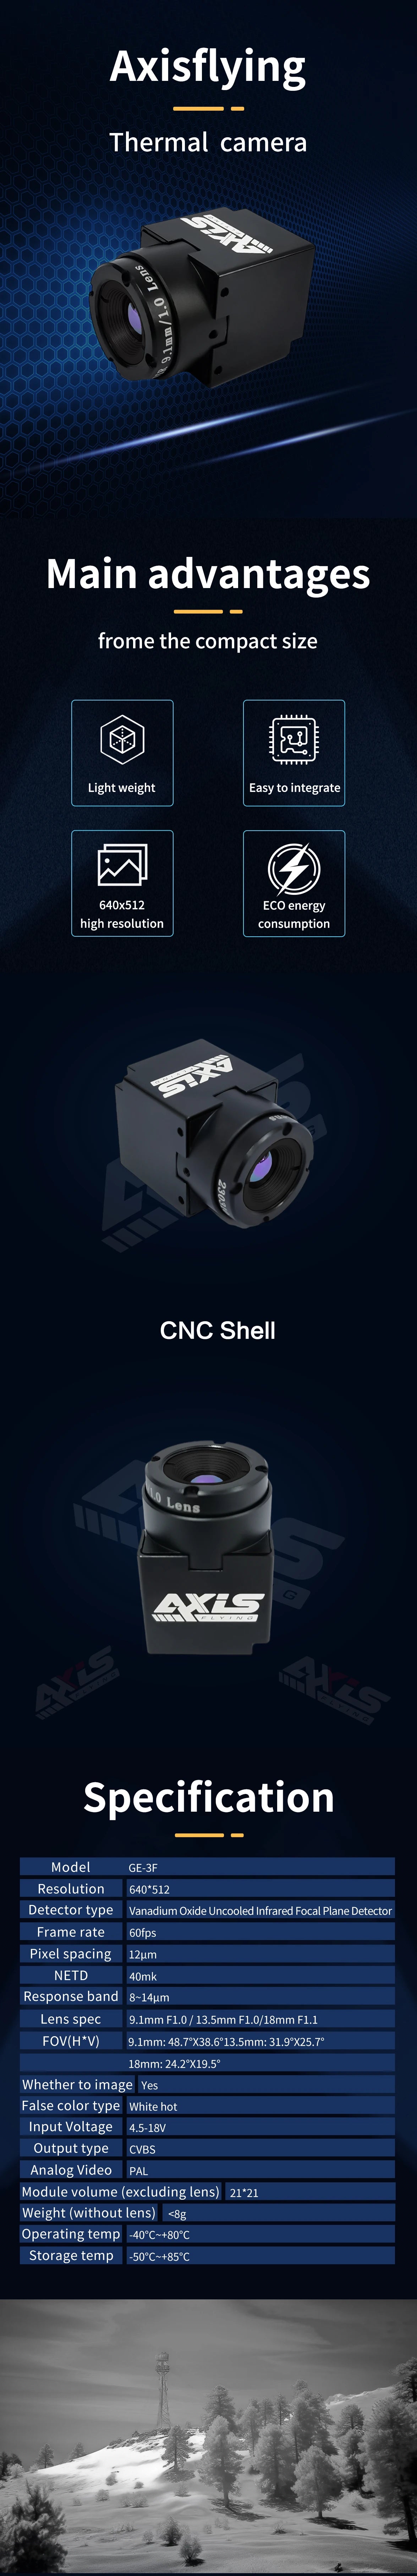 Axisflying 640 Thermal Imaging Camera, 640x512 ECO energy high resolution consumption CNC Shell 4x8 63 Specification